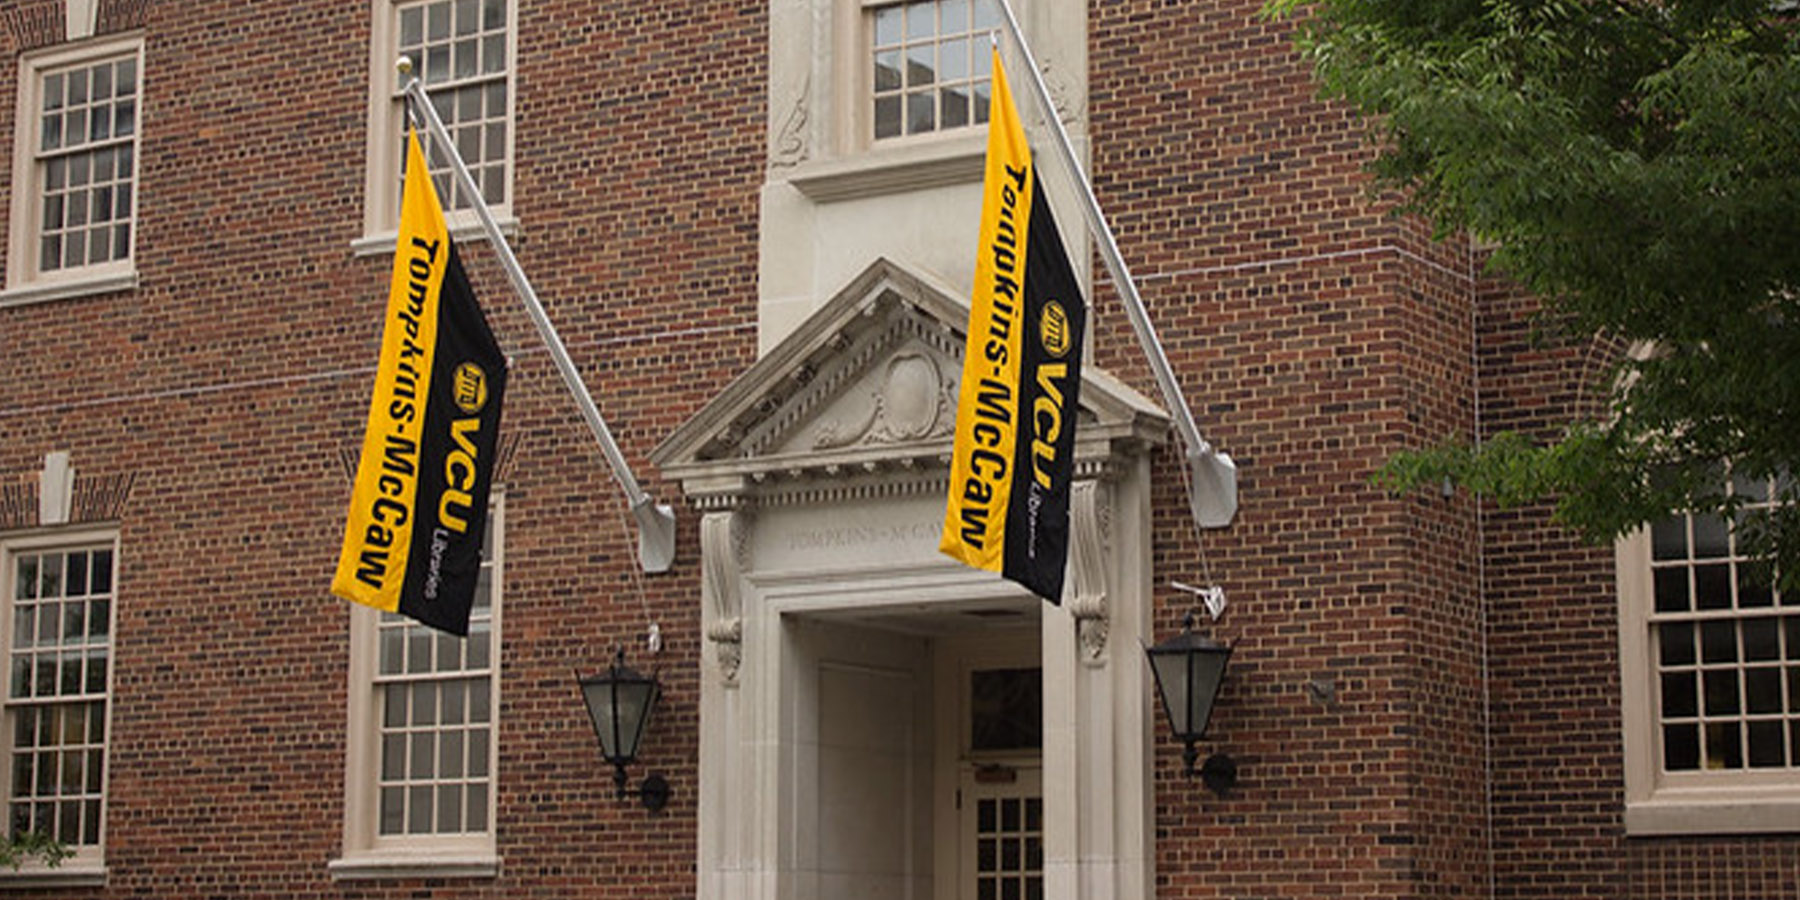 A photo of the front of the Medical College of Virginia campus library with the words Tompkins-McCaw Library engraved over the door with flags of black and gold with Tompkins-McCaw Library.